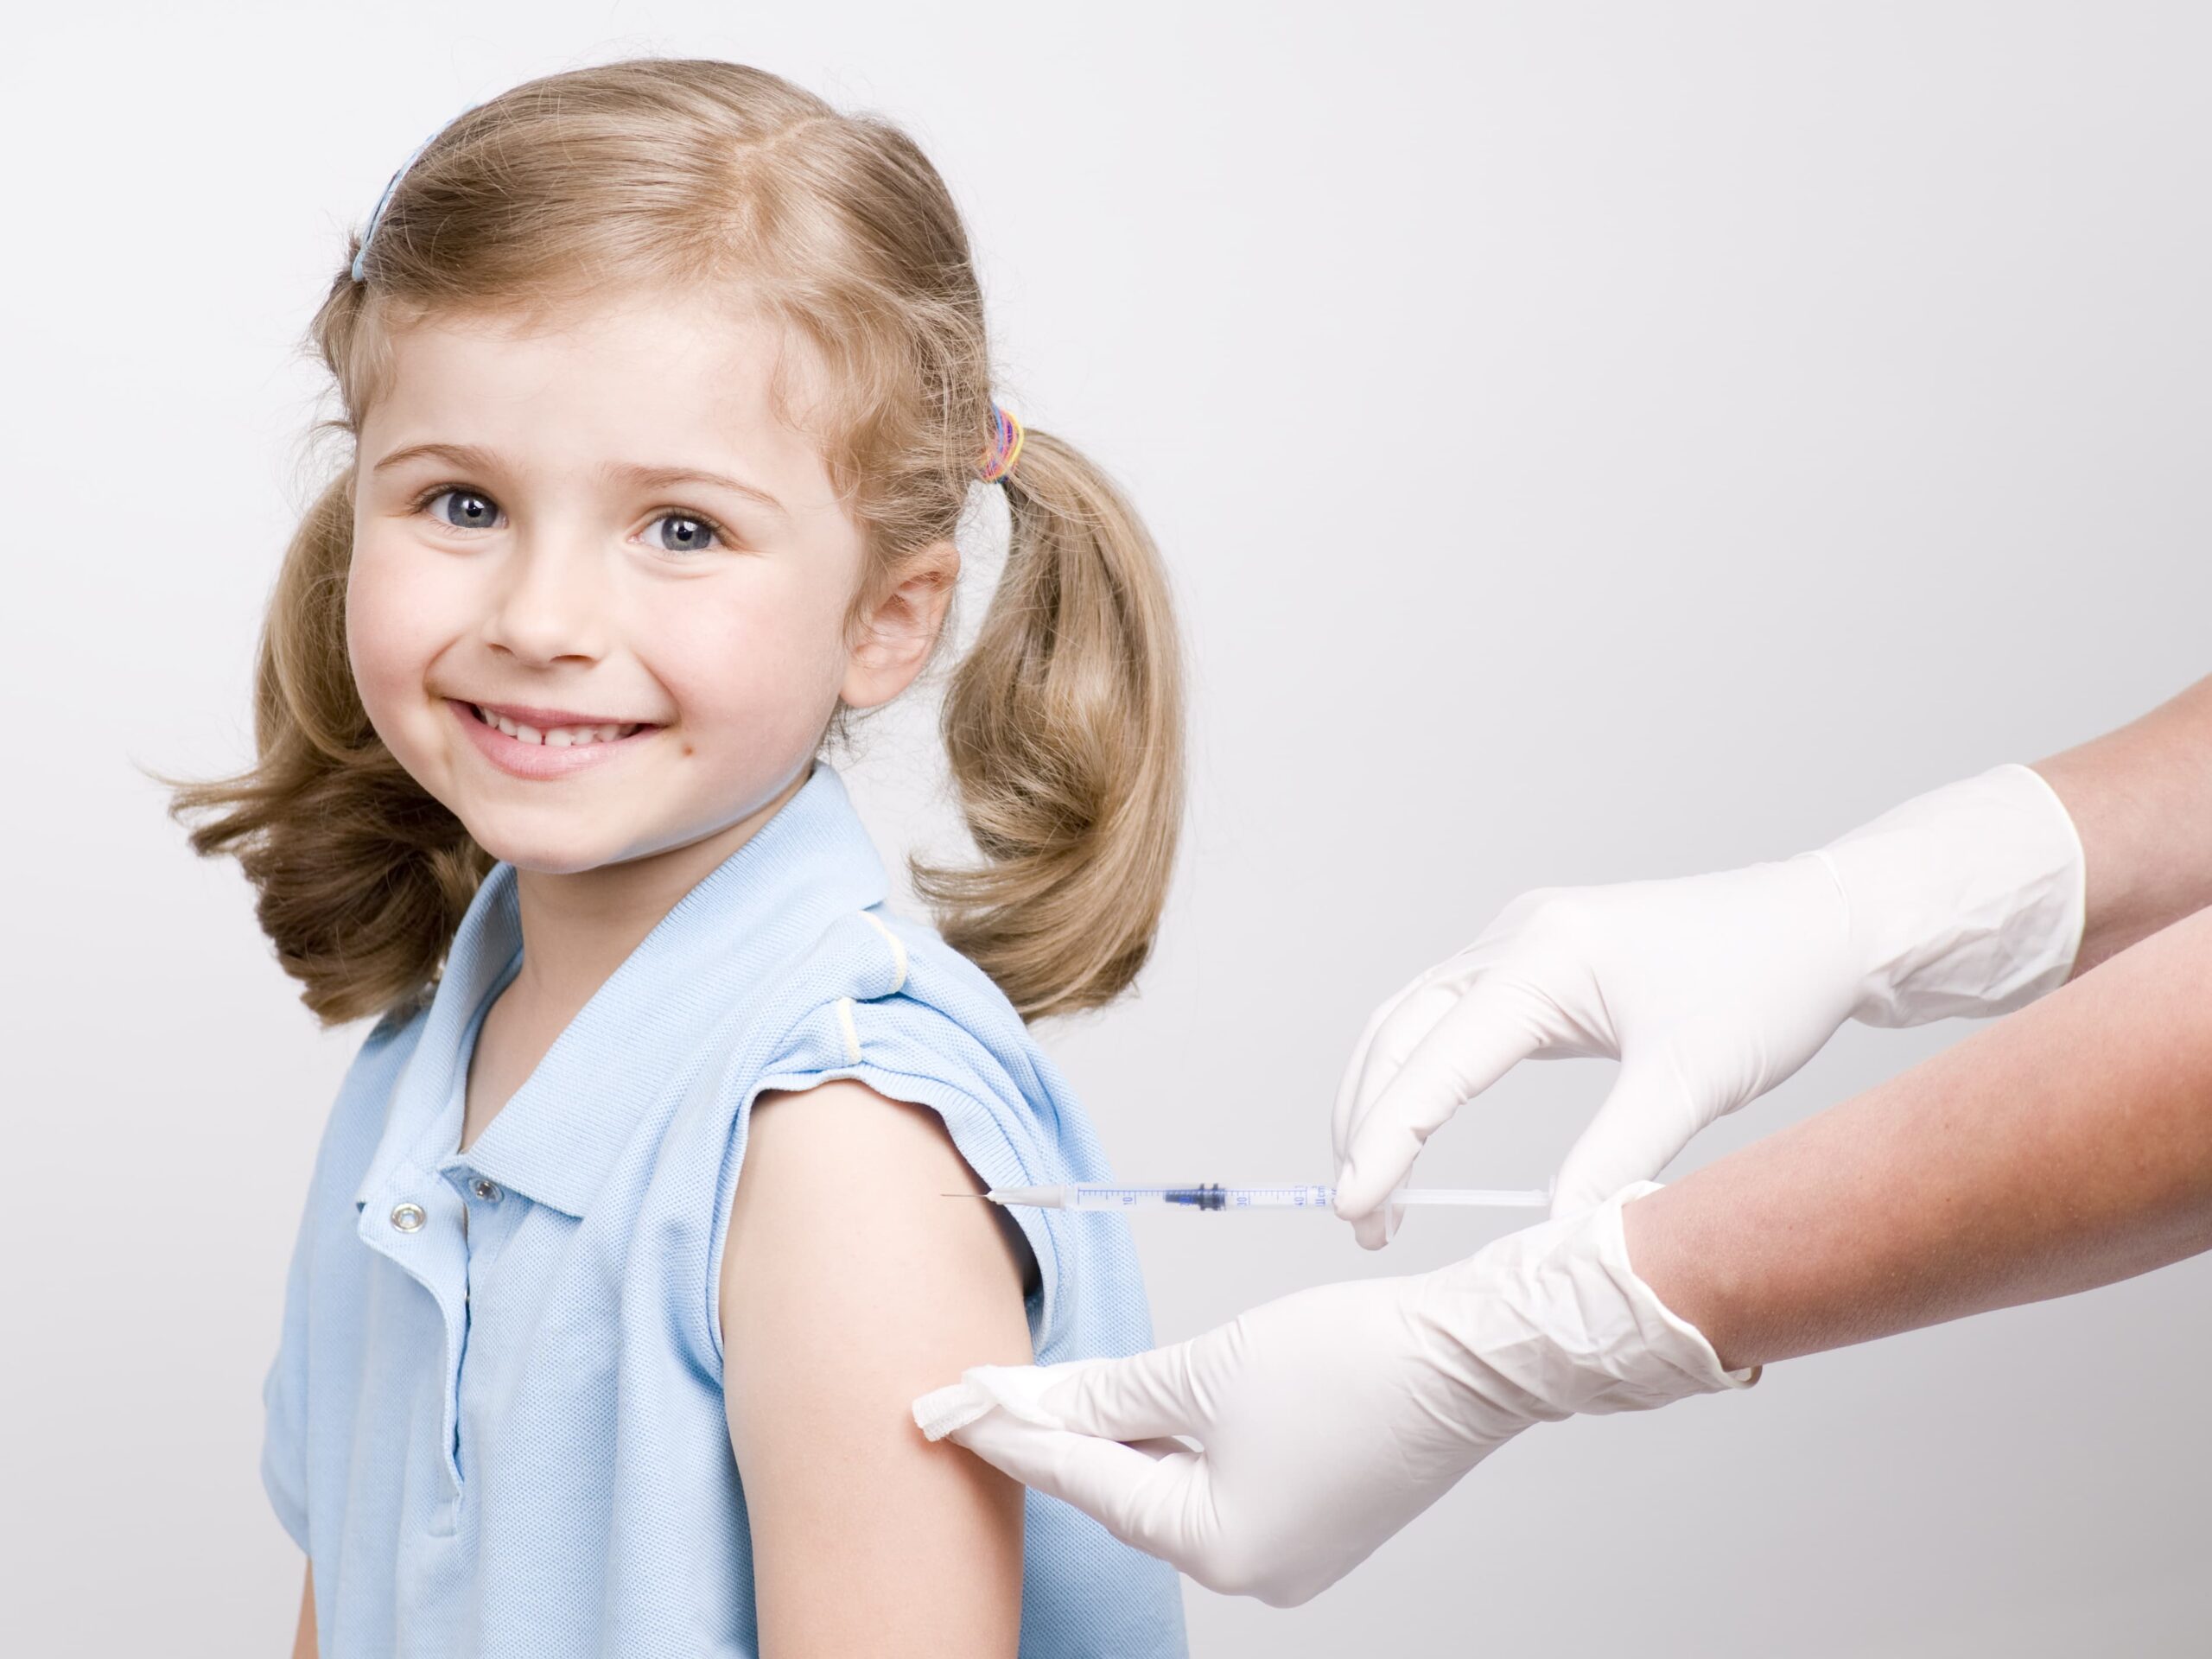 A smiling girl receives a vaccination in her arm.